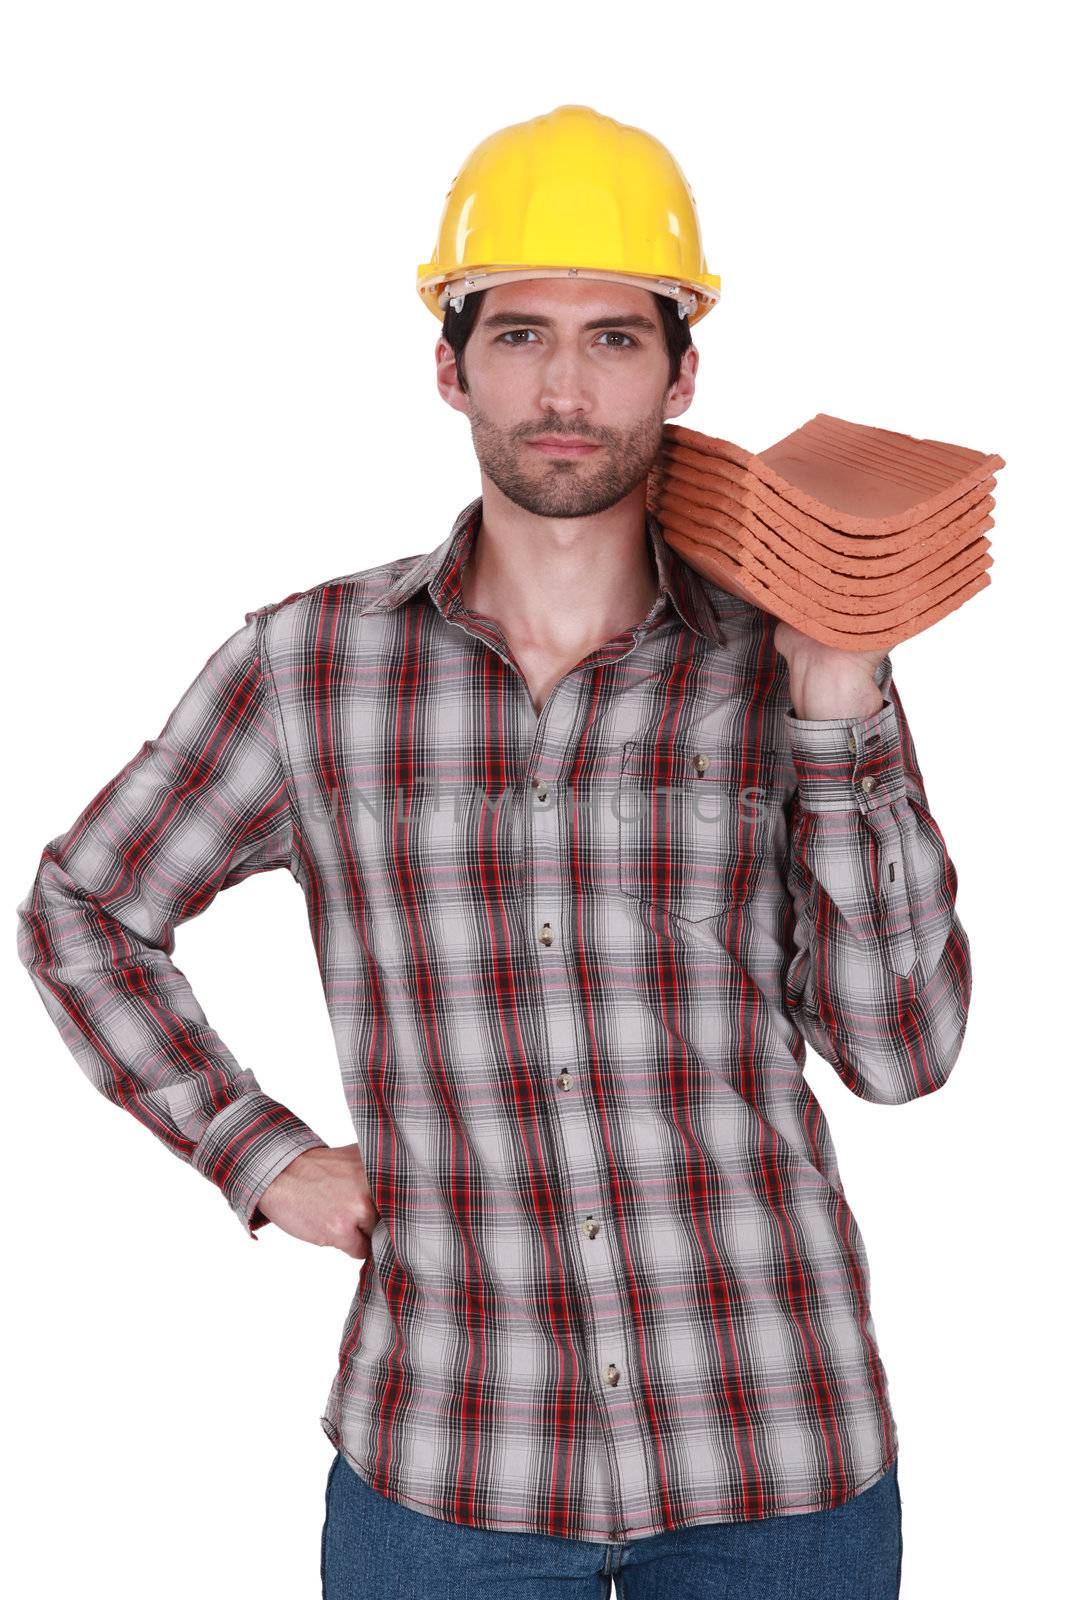 Builder holding stack of roof tiles by phovoir